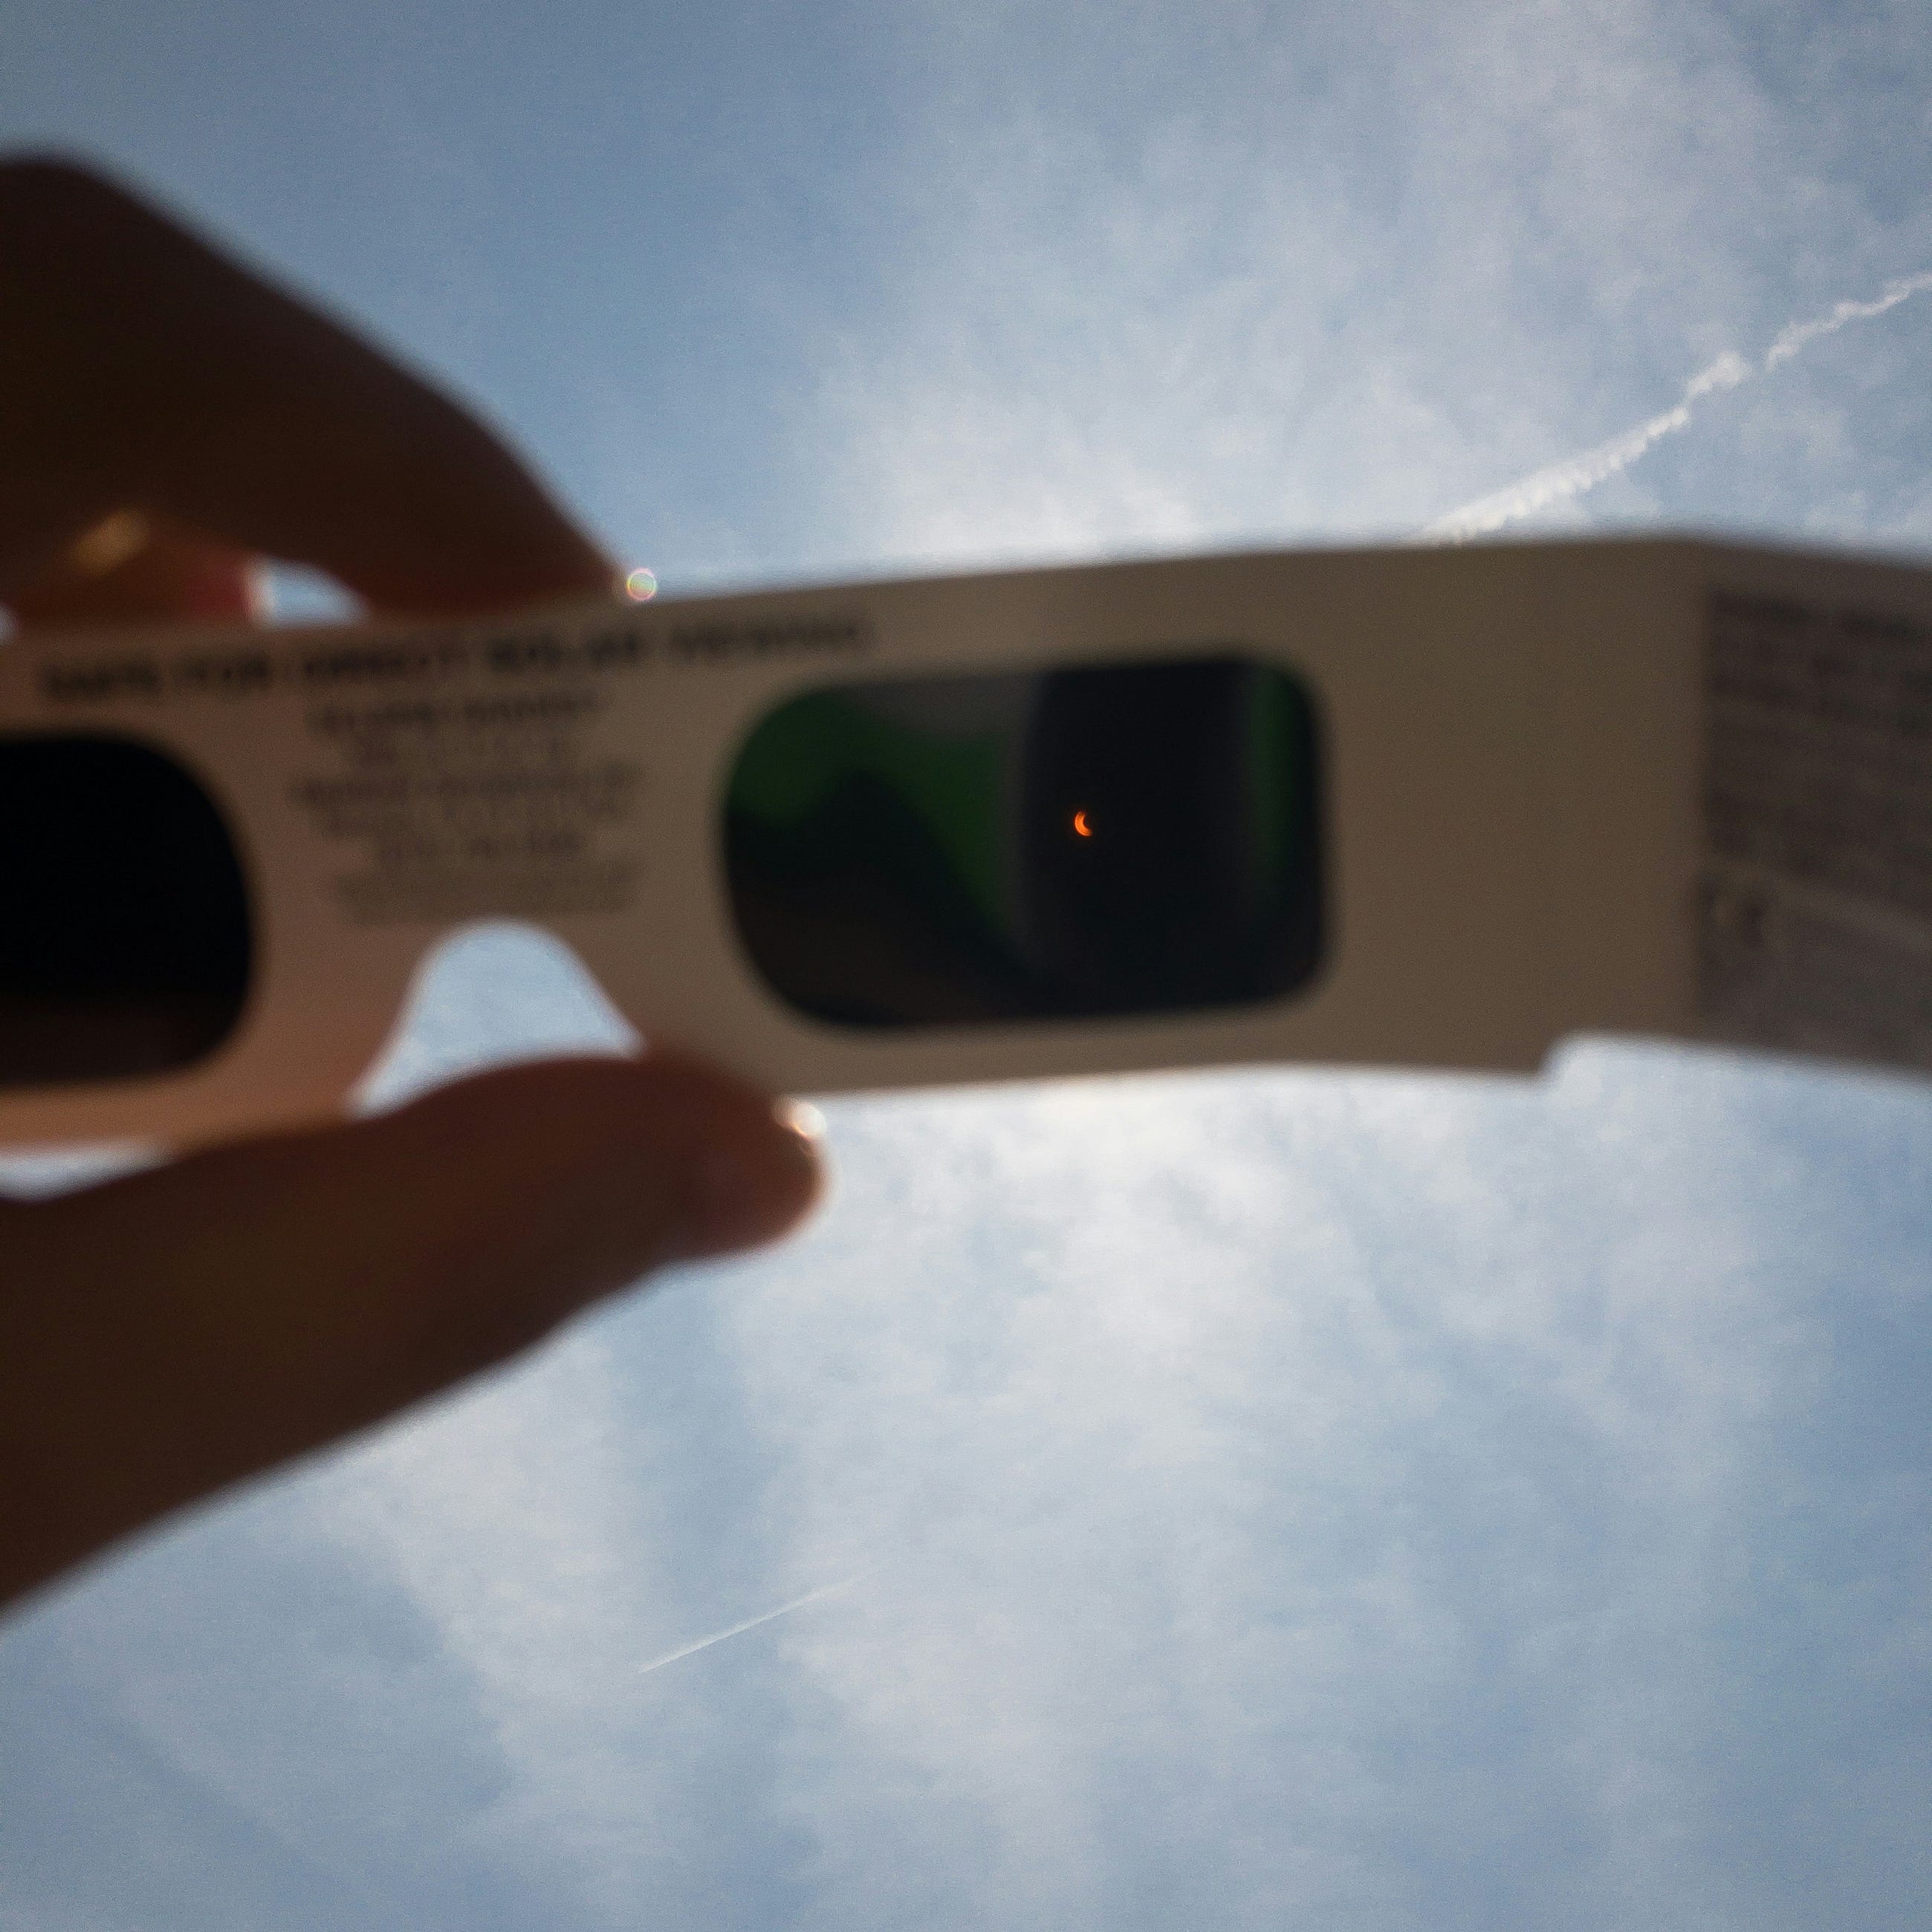 History-making Total Solar Eclipse Was a Flop in the Eyes of Impatient